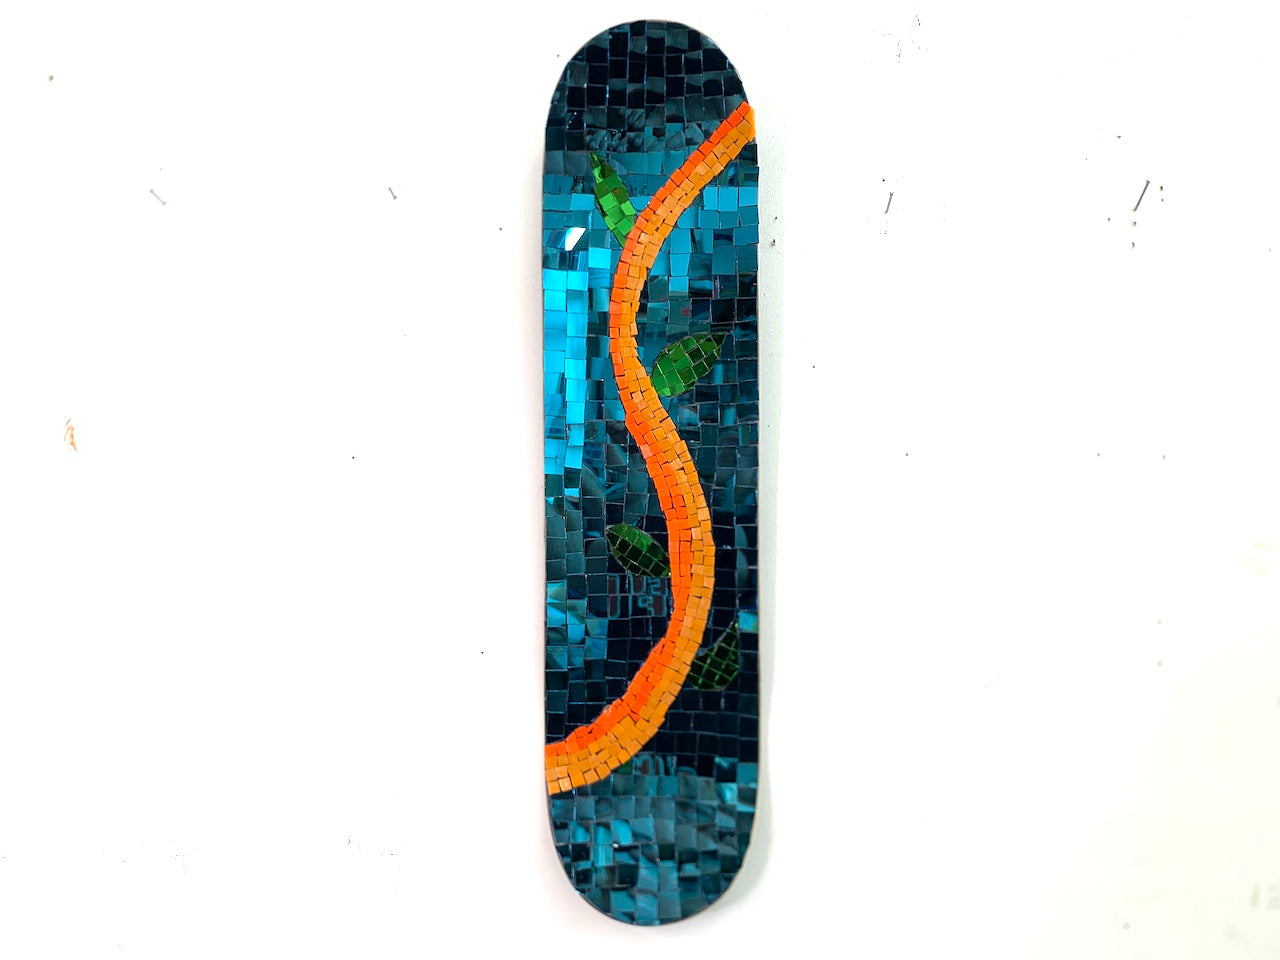 Thai mirror glass  skateboard depicting spring  with teal background Edit alt text